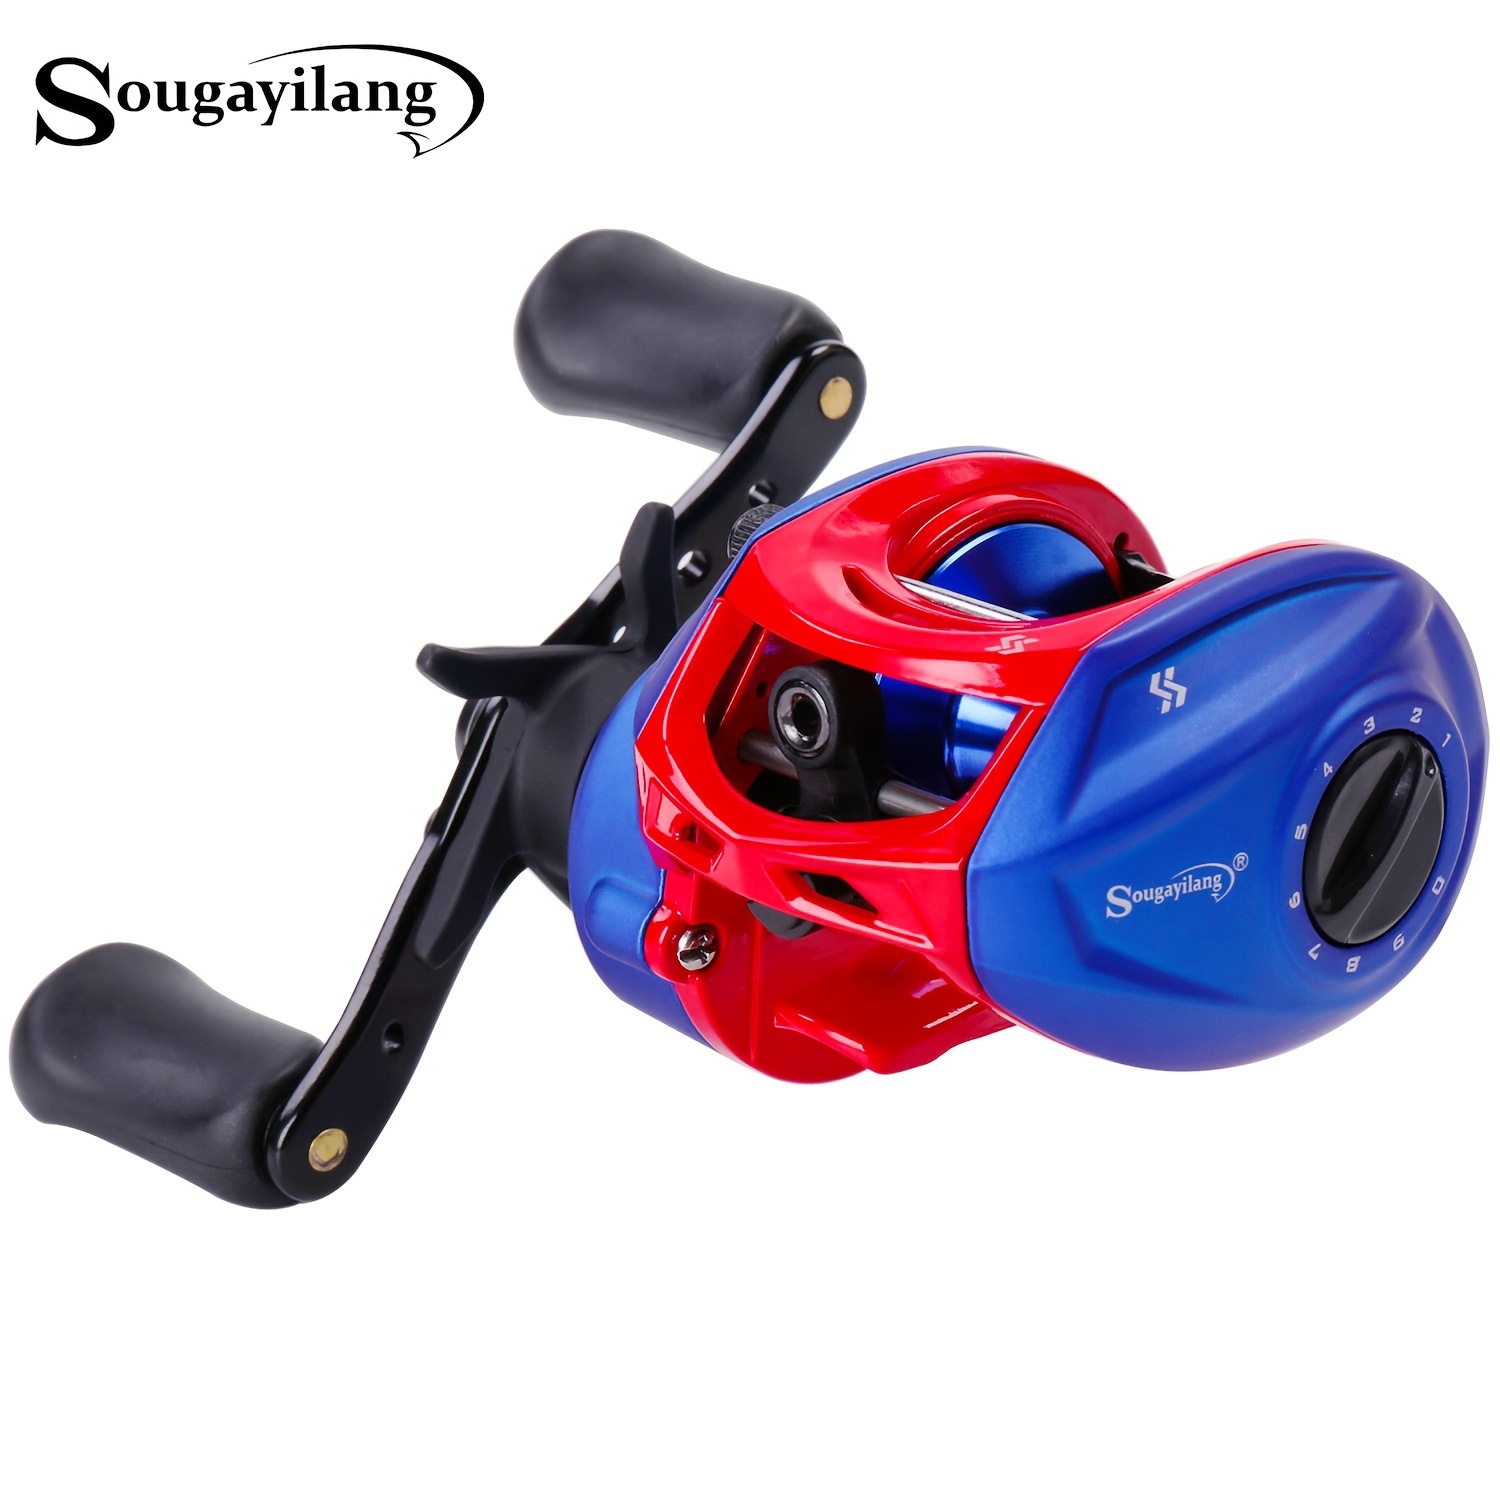 Sougayilang Fishing Reel Baitcasting Reel Left Right With 8 1 1